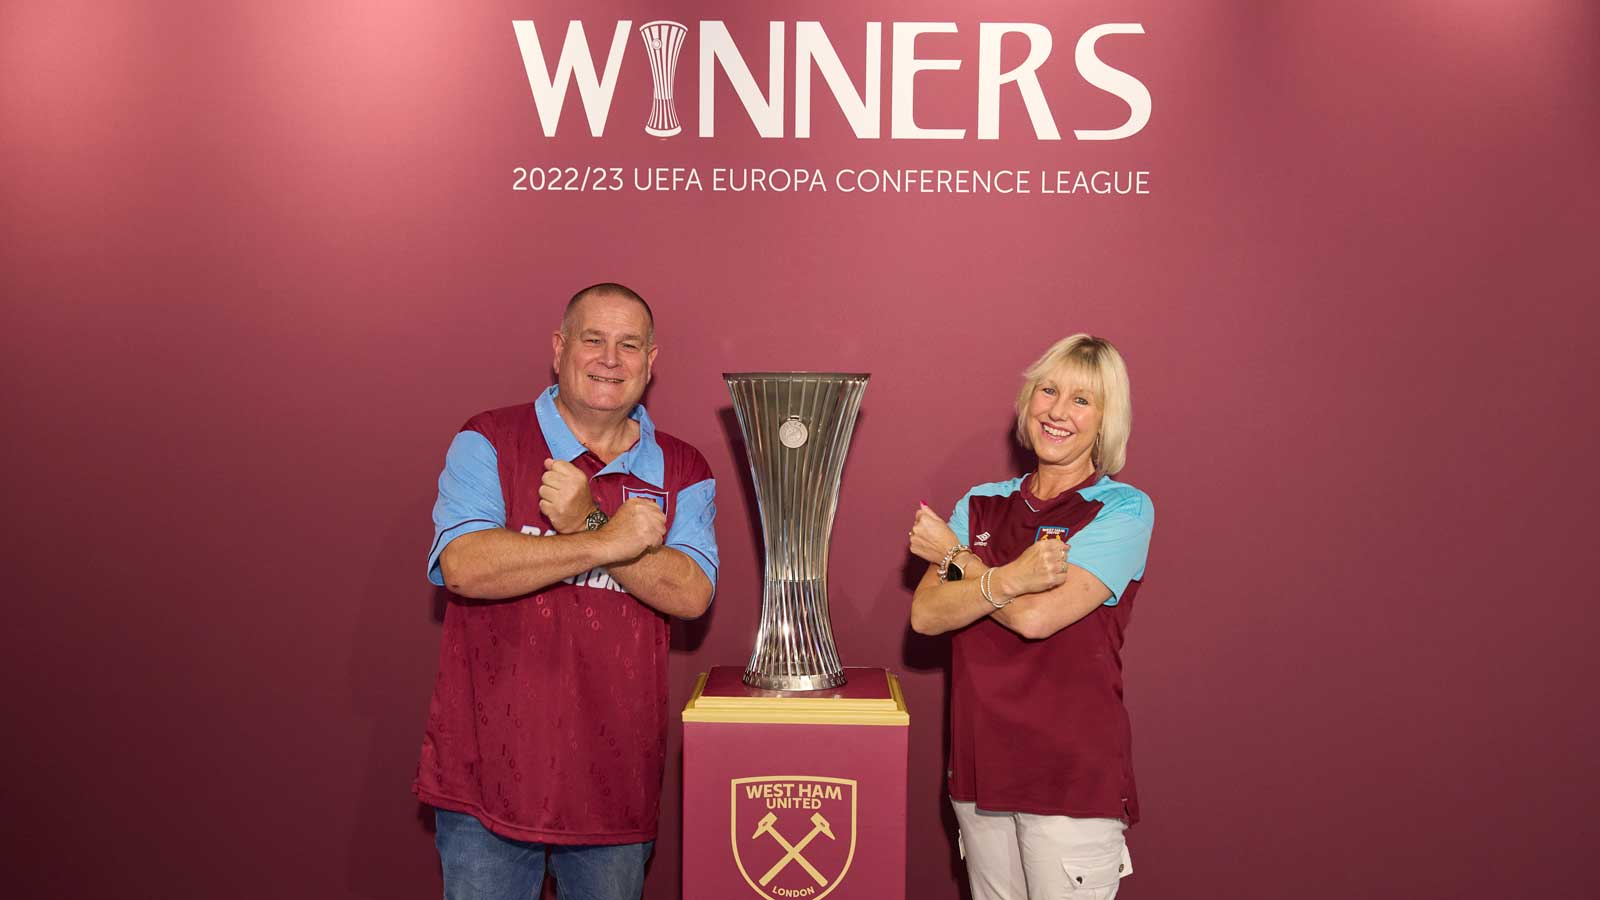 West Ham United supporters pose with the UEFA Europa Conference League trophy